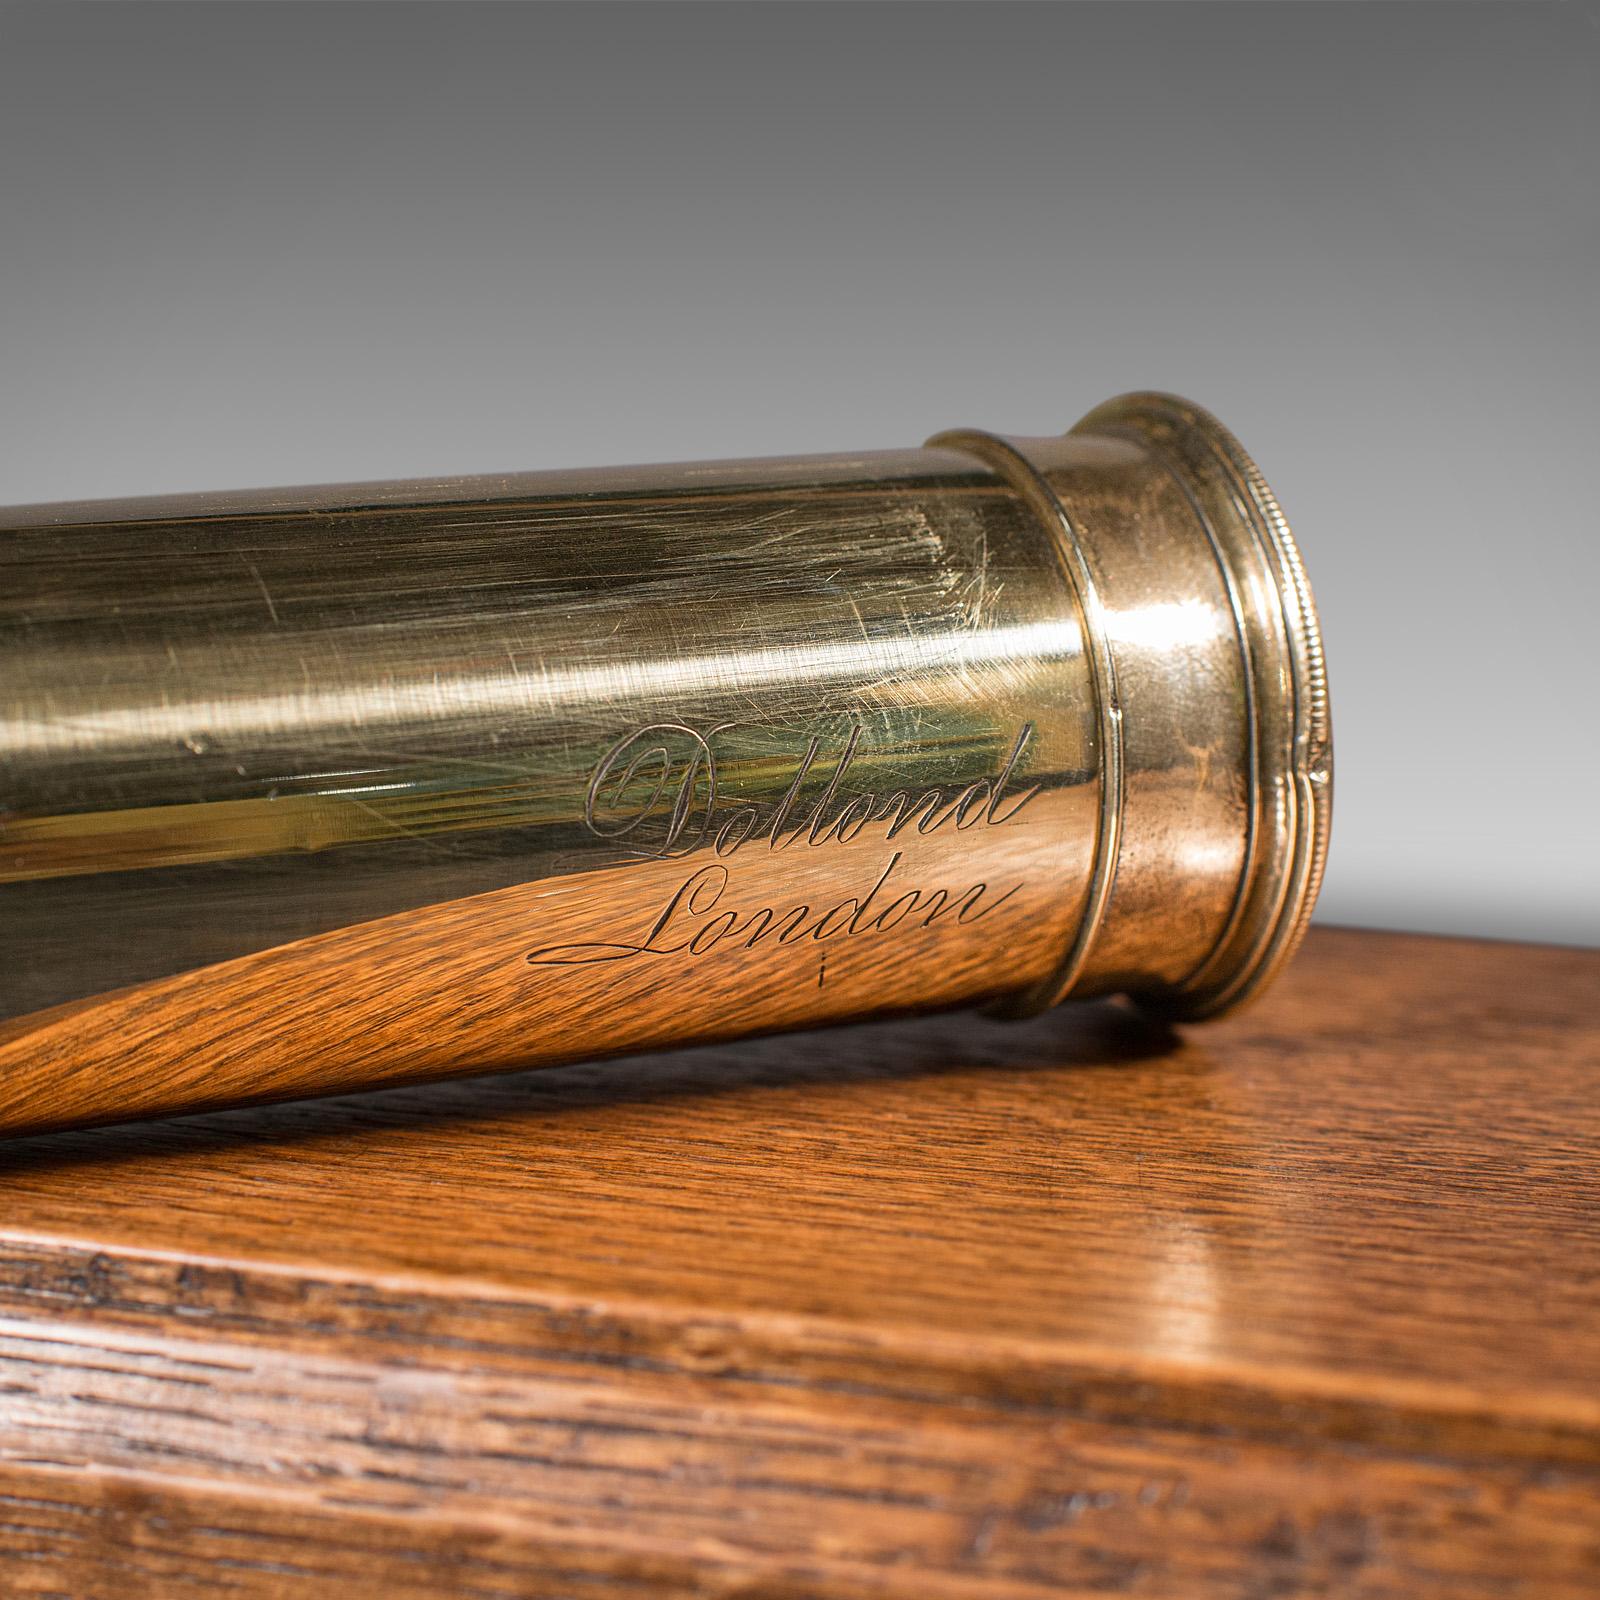 Antique 4 Draw Telescope, English, Terrestrial, Astronomical, Dollond, Victorian For Sale 3